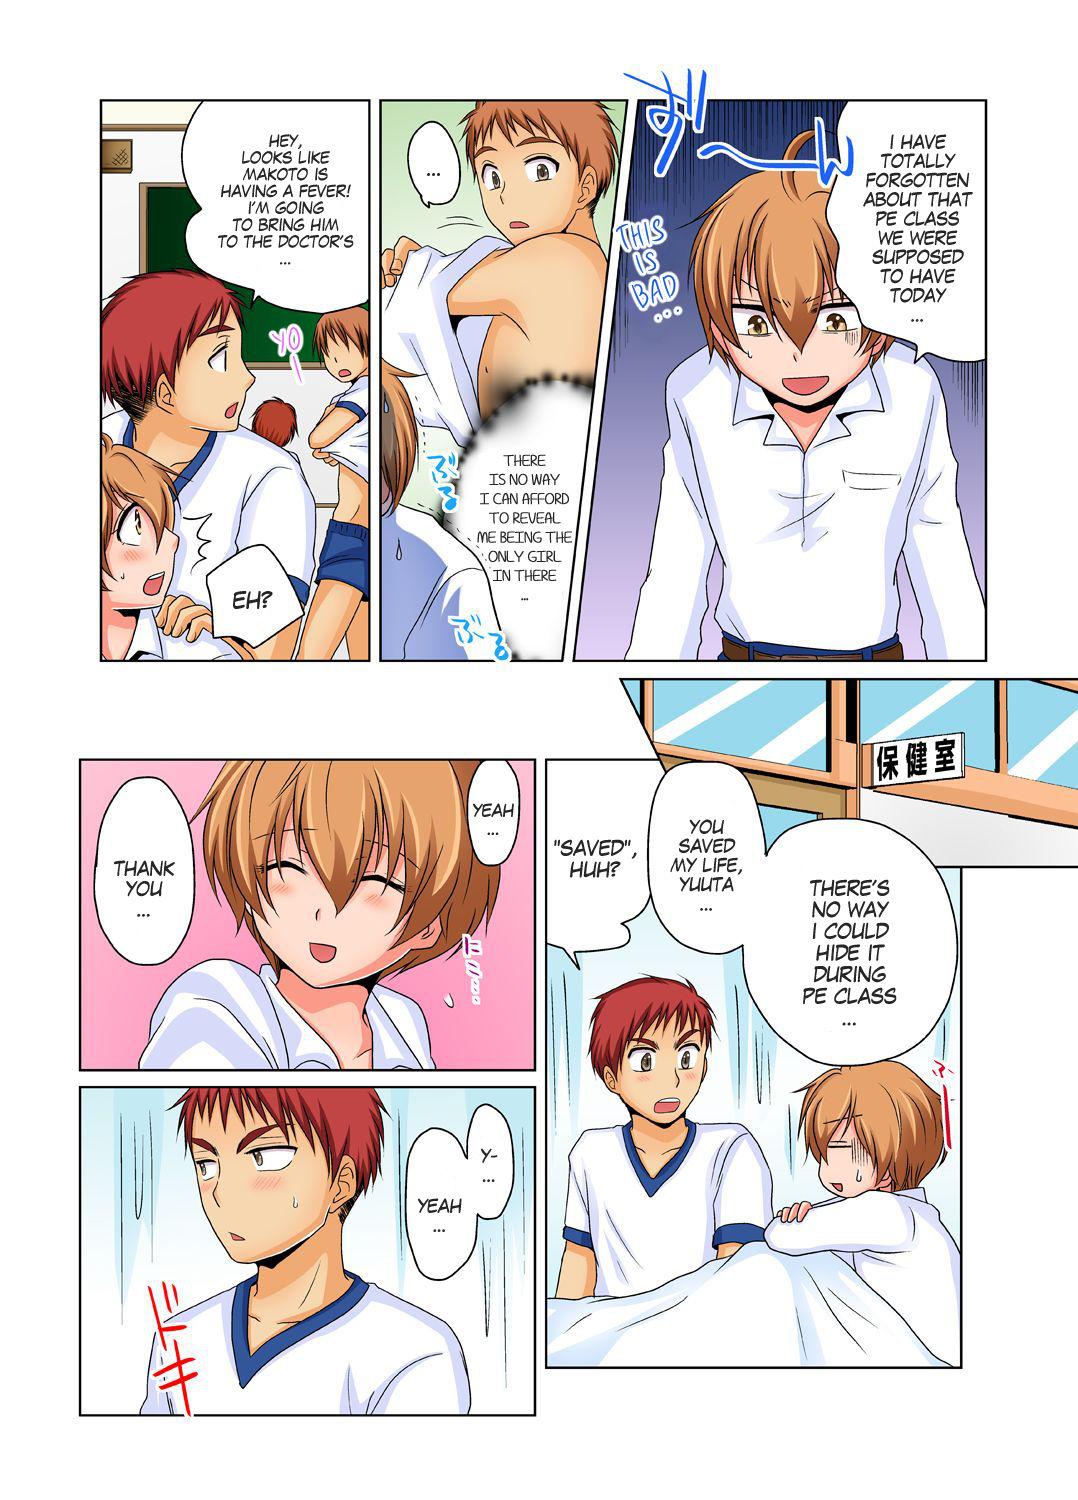 Innocent Nyotaika de Ecchi Kenshin!? Mirudake tte Itta no ni... 2 | Gender Bender Into Sexy Medical Examination! You said that you were only going to look... 2 Girls - Page 5